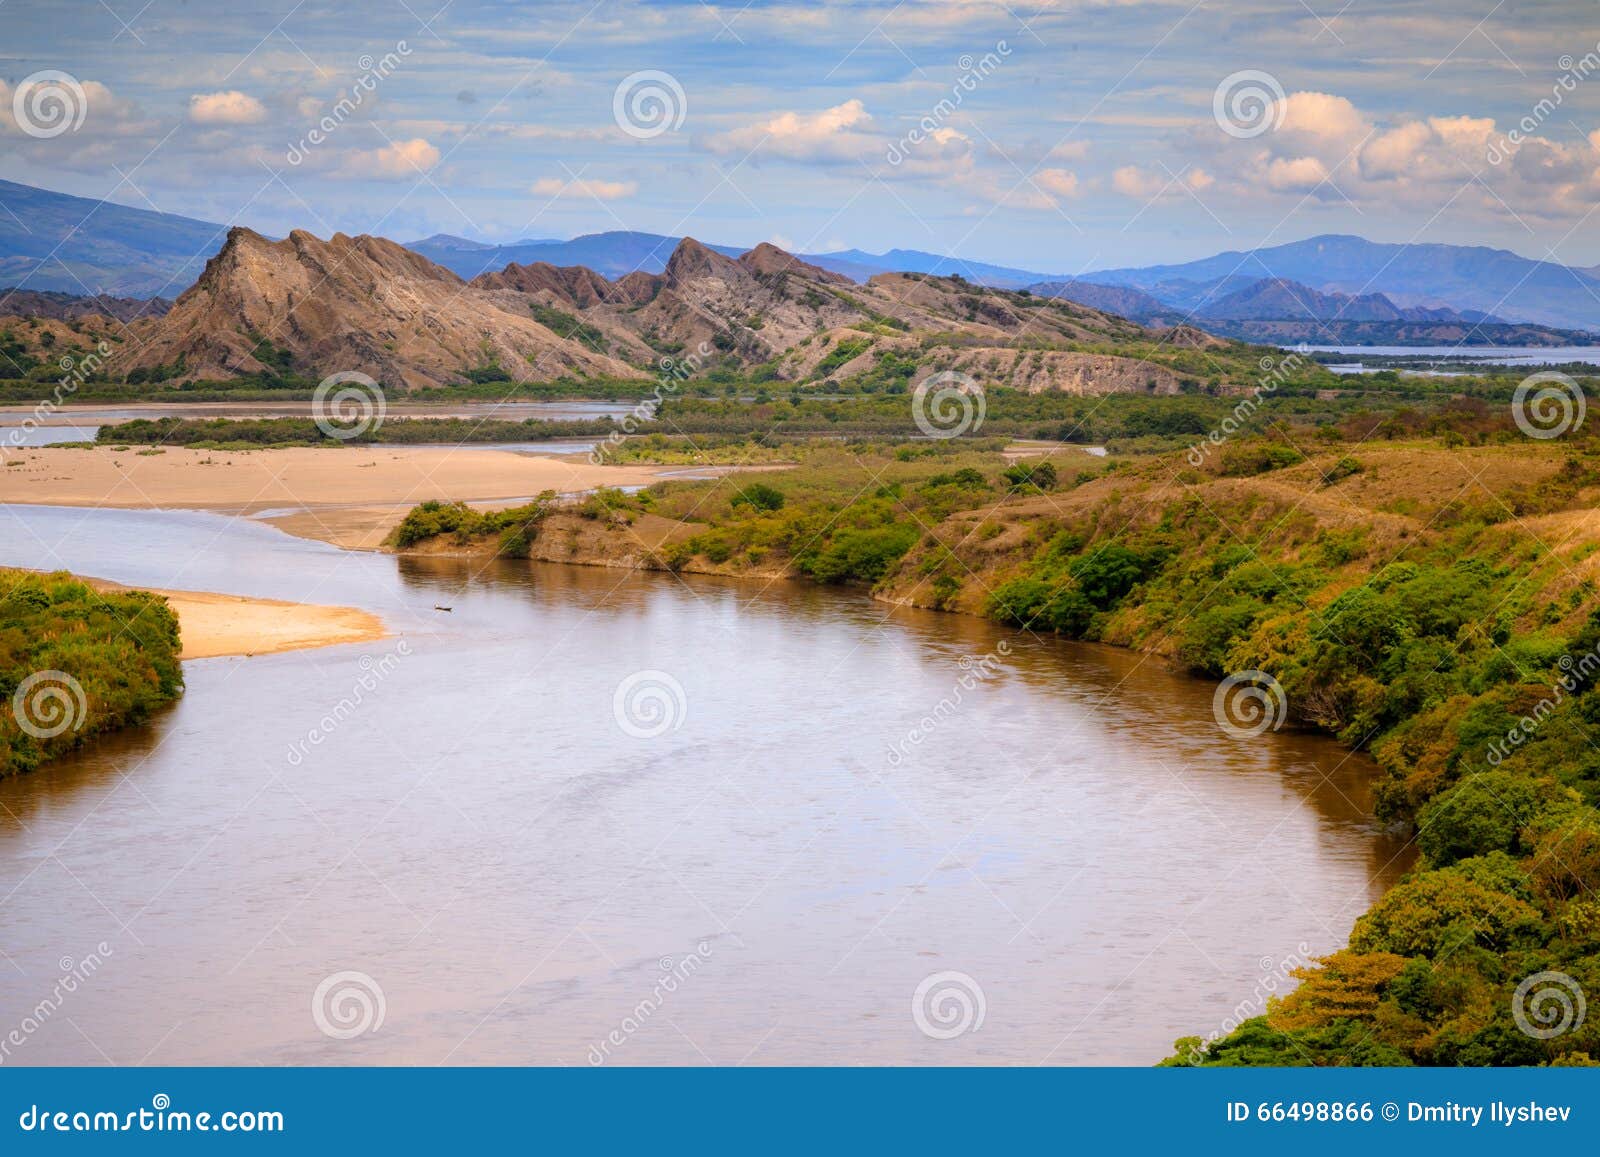 wide river and rock mountains